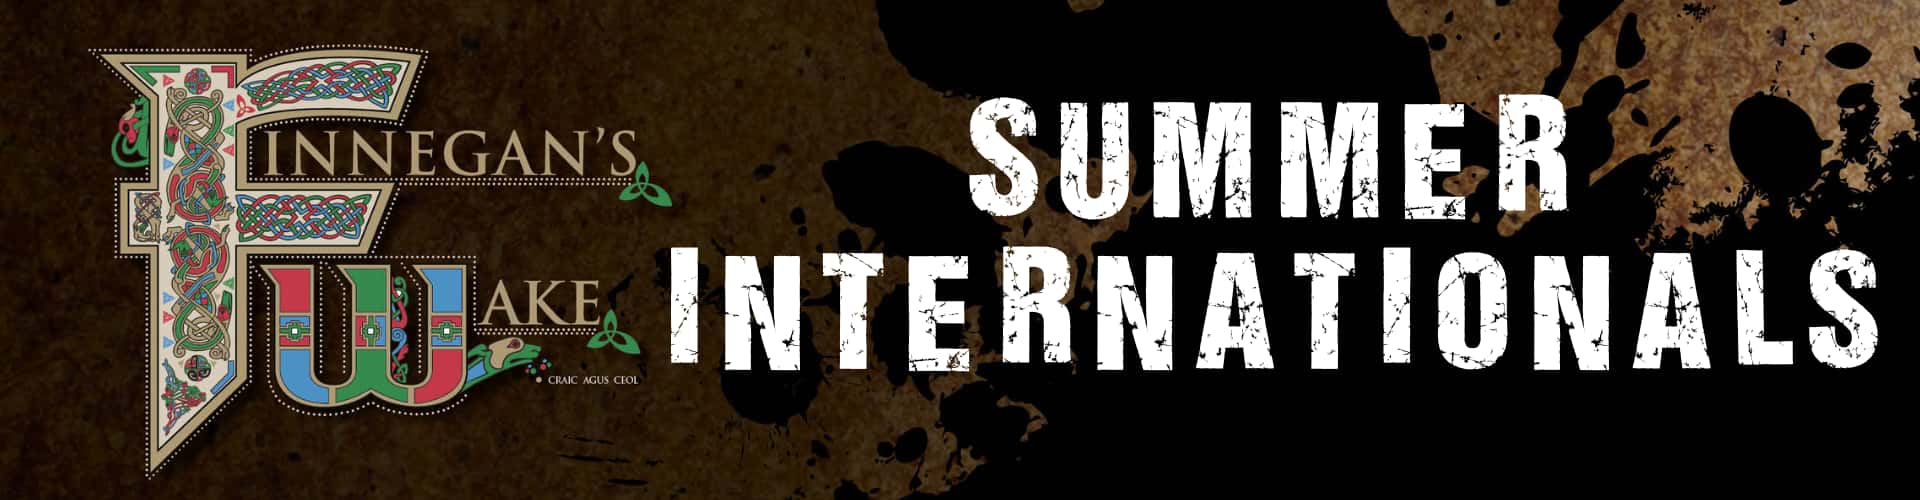 Watch the Rugby Union Summer Internationals at Finnegan's Wake